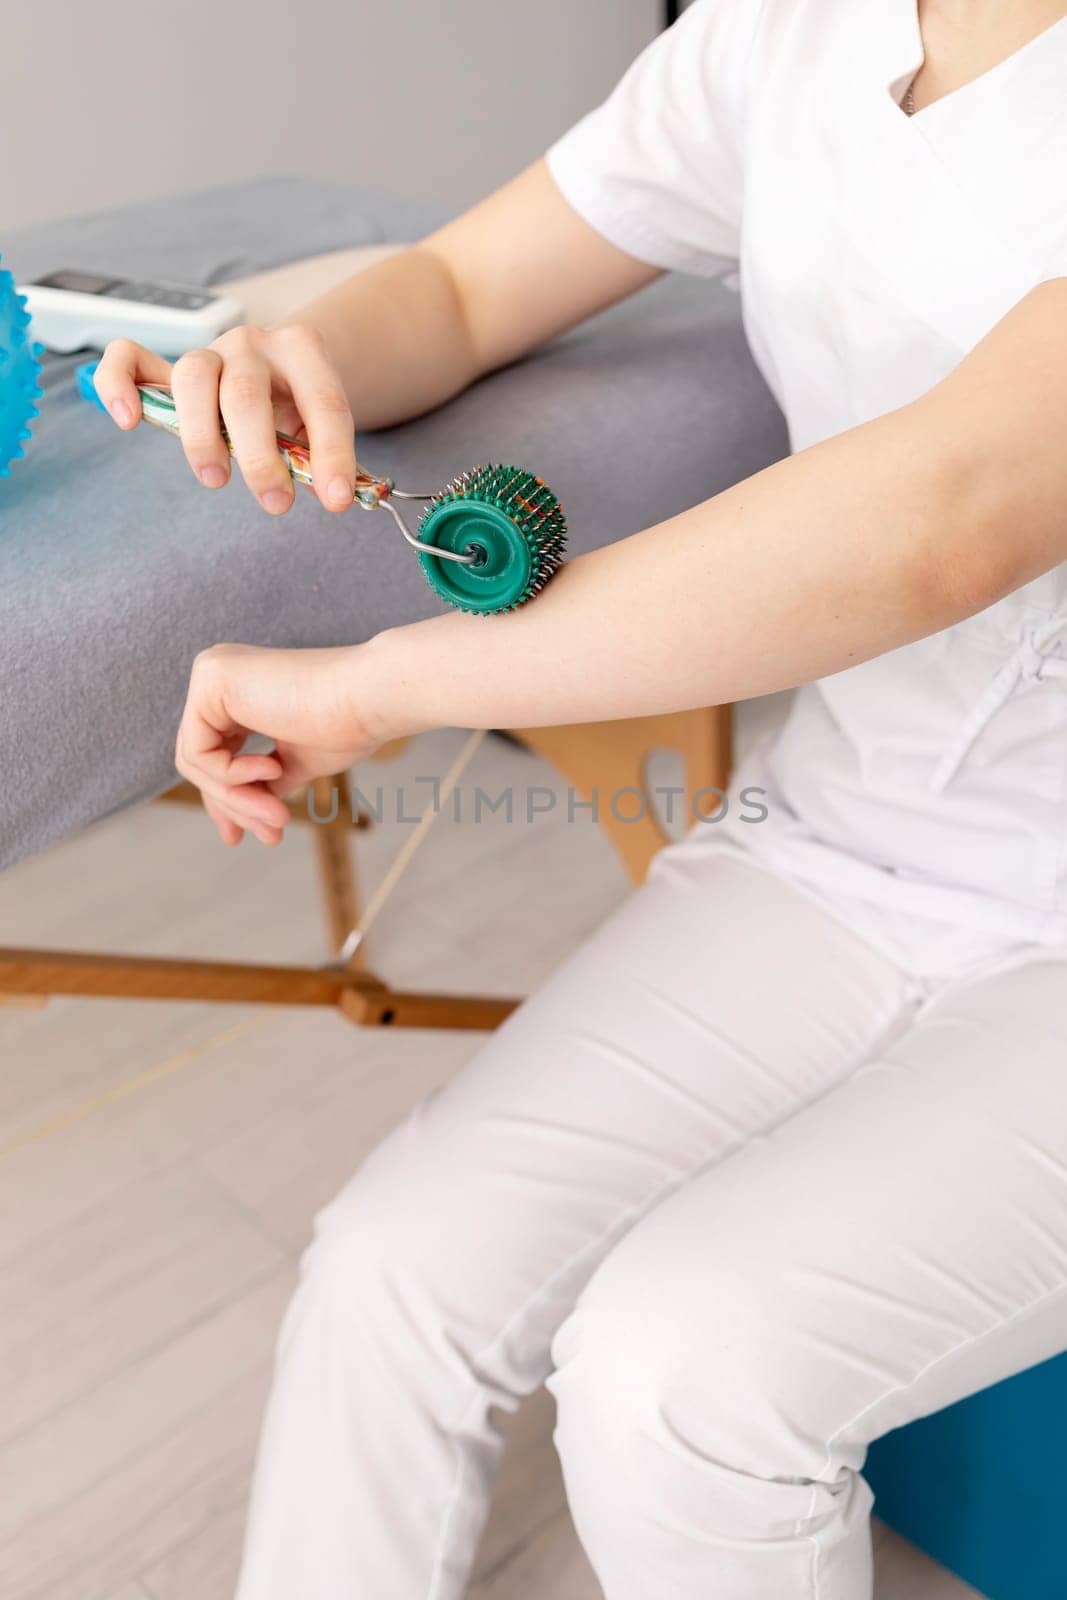 Closeup Rehabilitation Specialist, Physical Therapist Shows Rehab Tool Meso Roller With Titanium Needles On Hand, Massage Ball With Pimples in Therapeutic Room. Healthcare, Rehabilitation. Vertical.